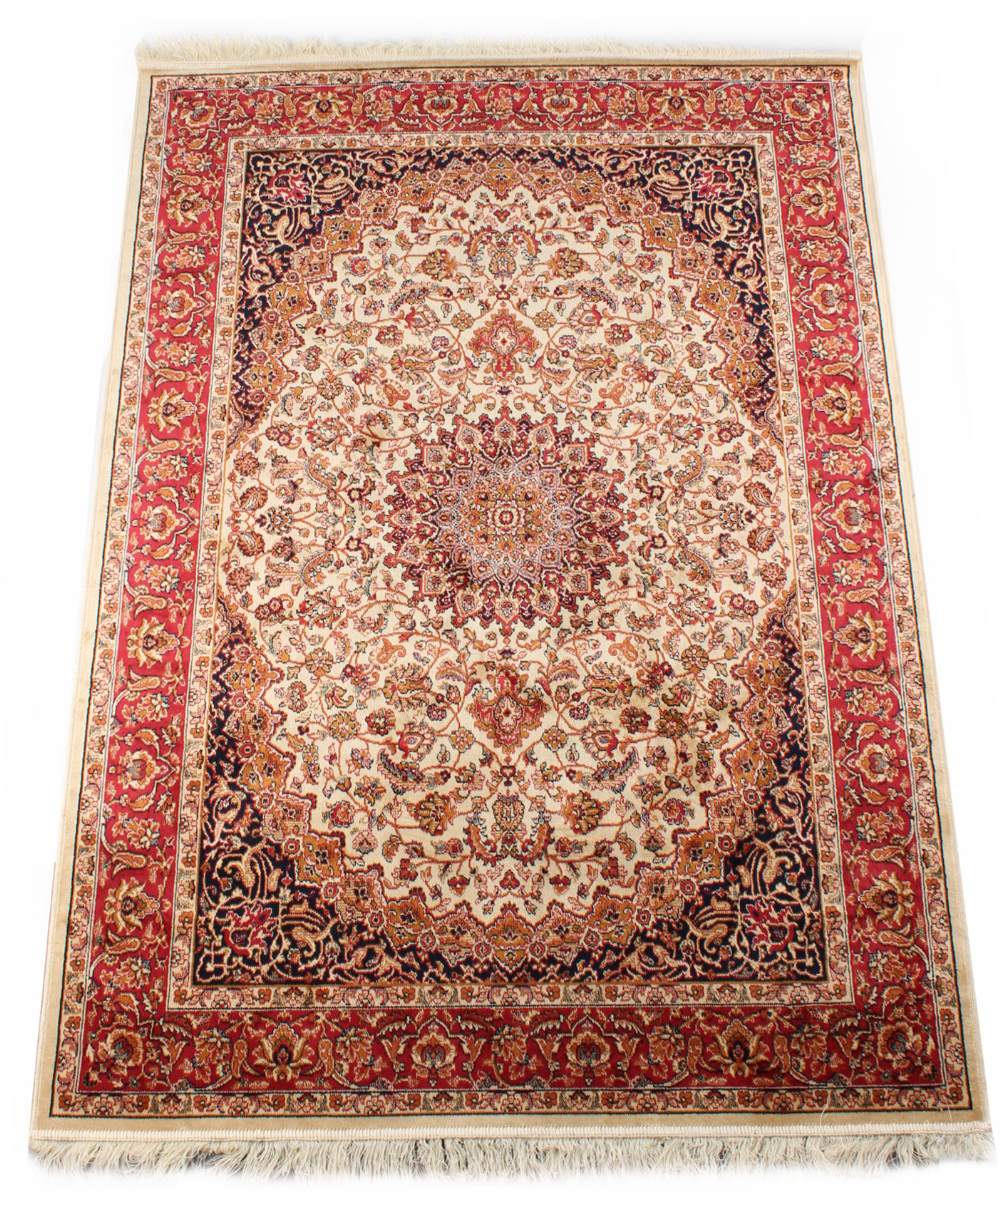 A Kashan style rug with ivory ground, 75 by 53ins. (190 by 135cms.) (see illustration).